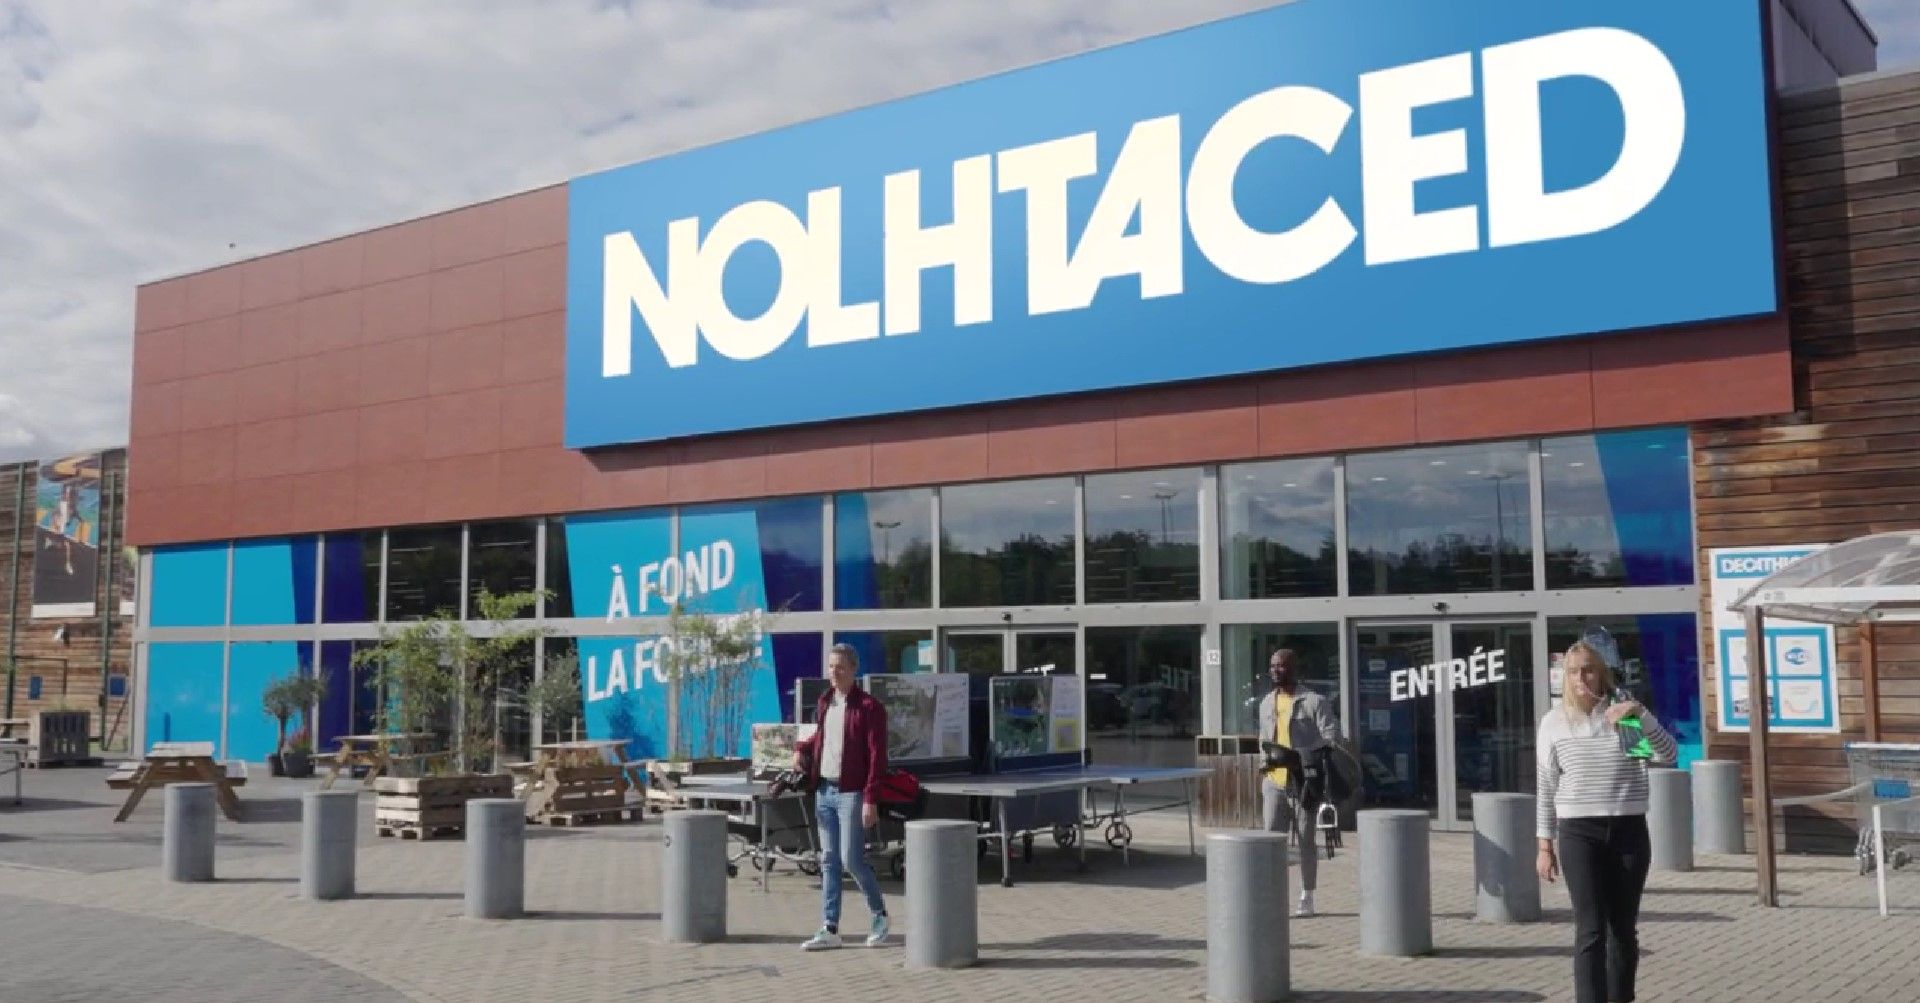 Why has Decathlon reversed its name to Nolhtaced in Belgium?